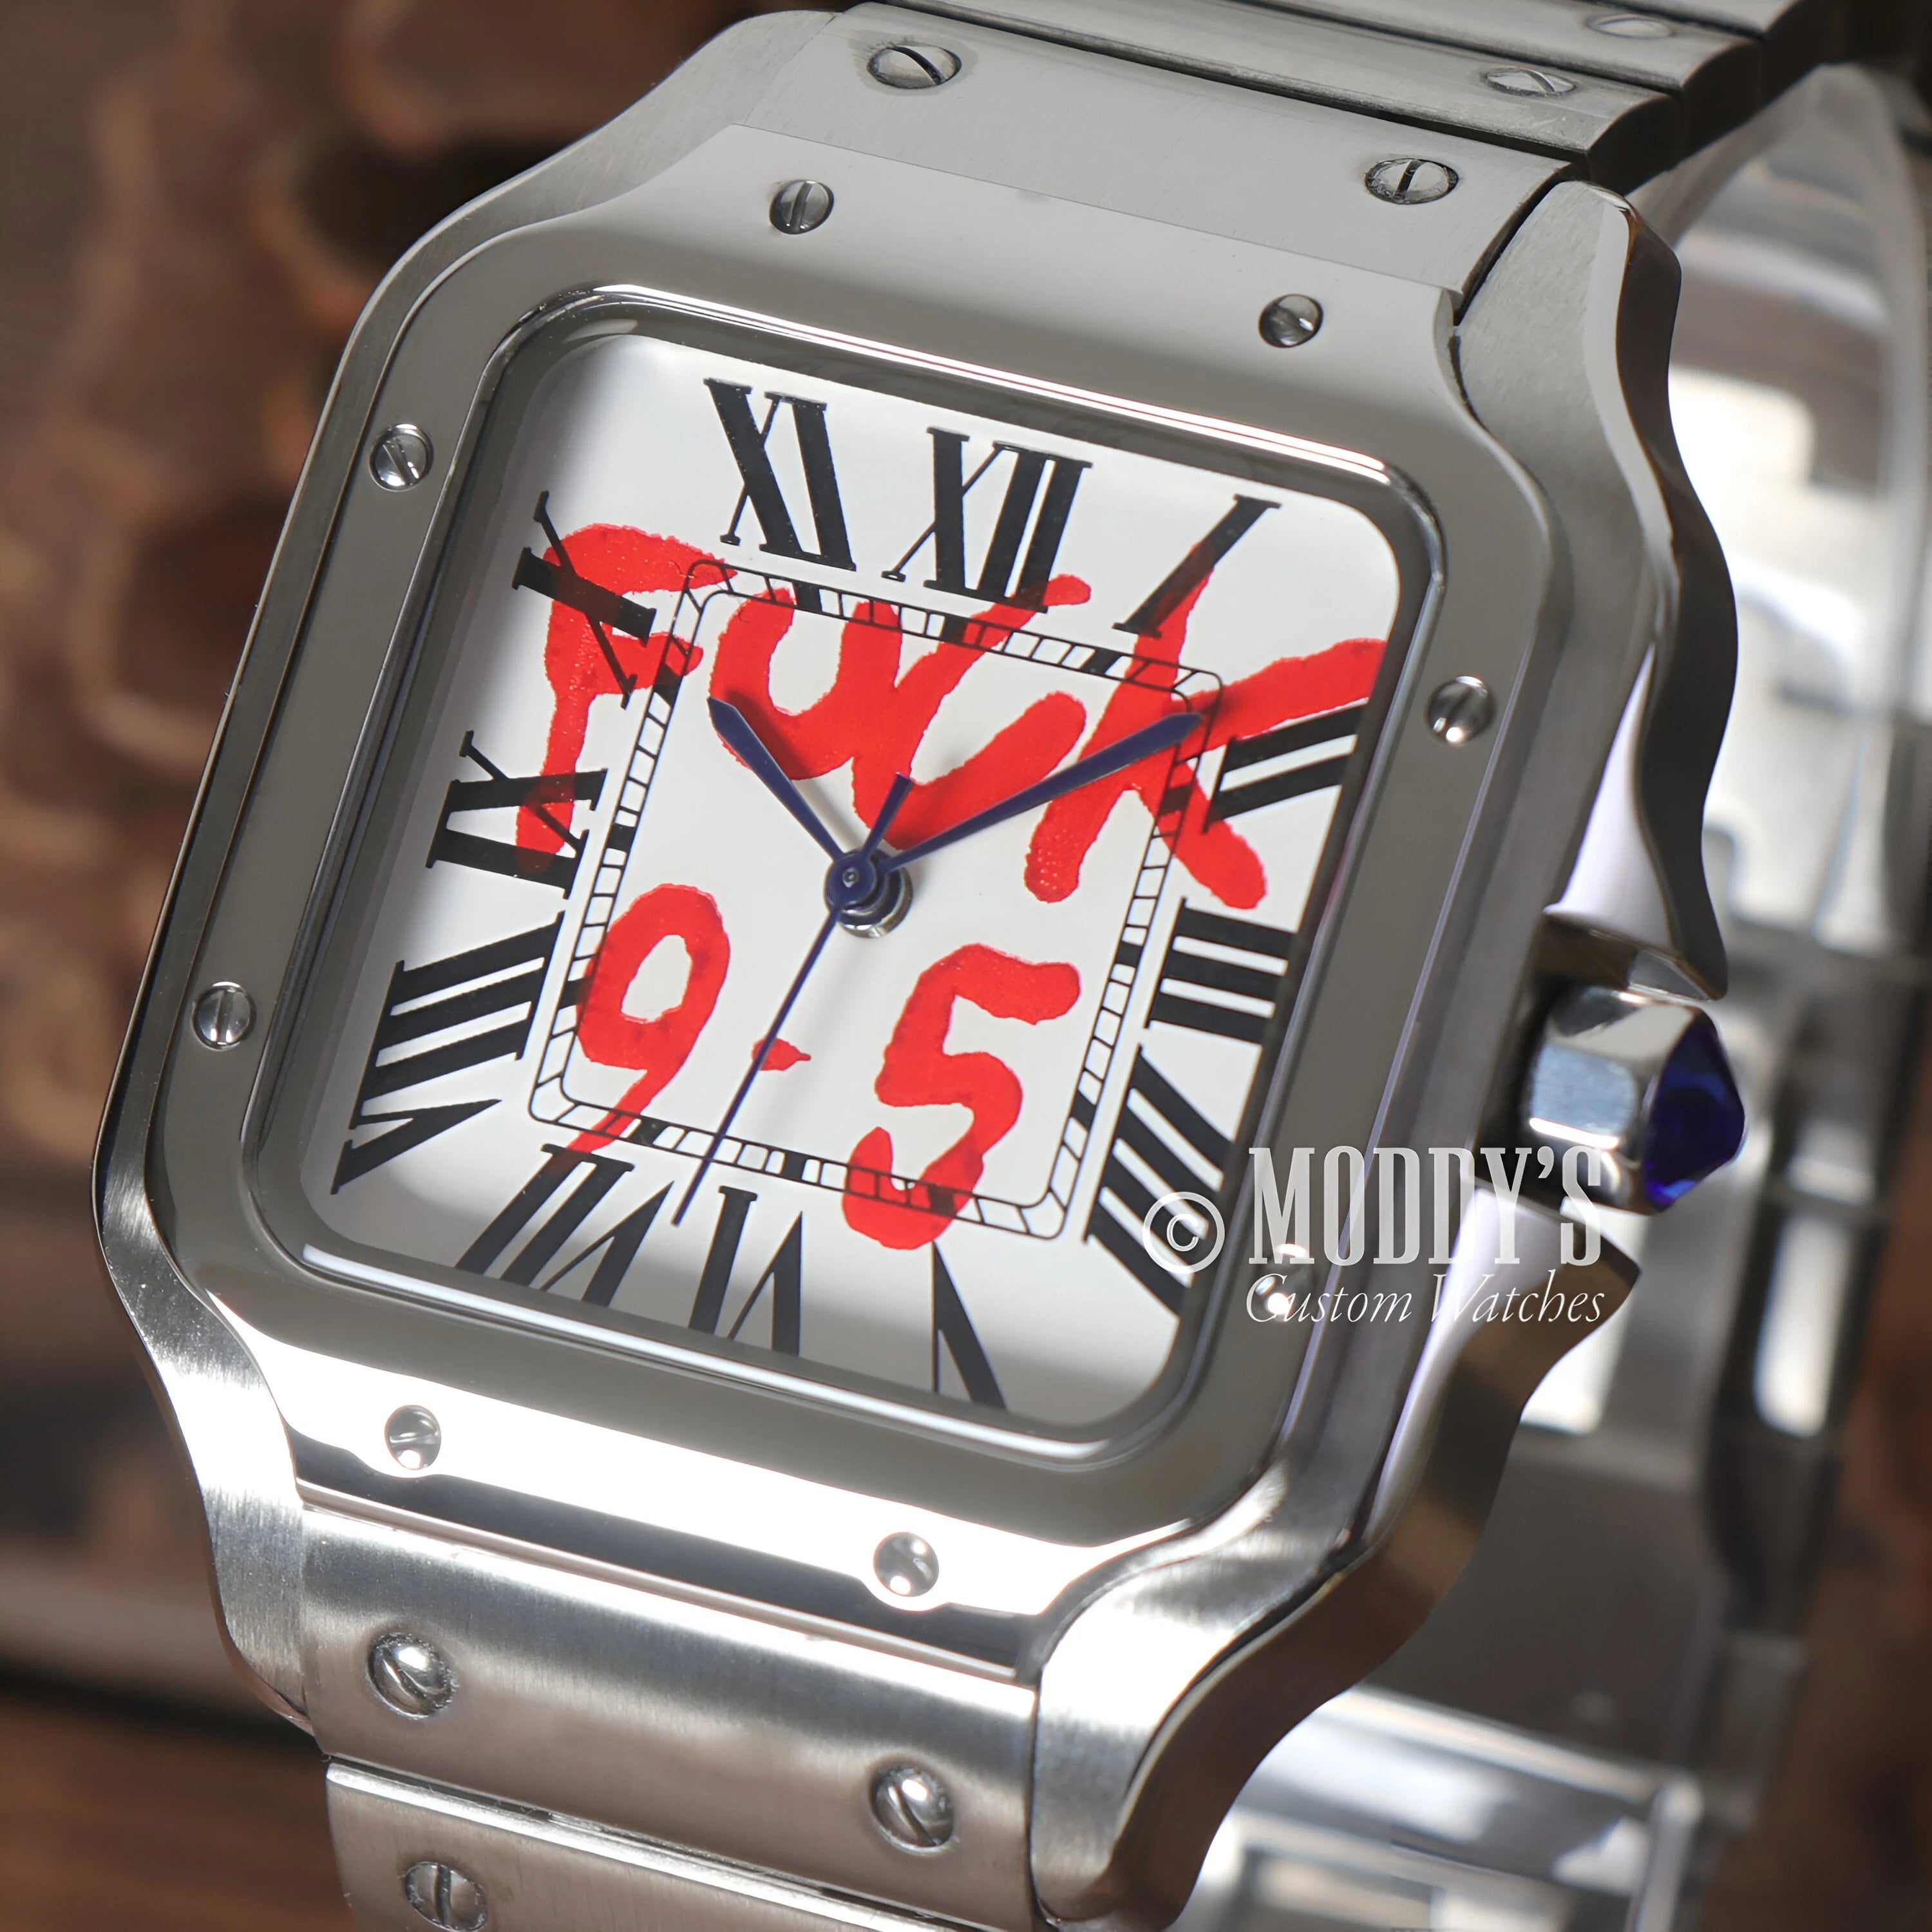 Santeiko 9 - 5 Edition Luxury Wristwatch With Seiko Nh35 Automatic Movement And Red Graffiti Numbers